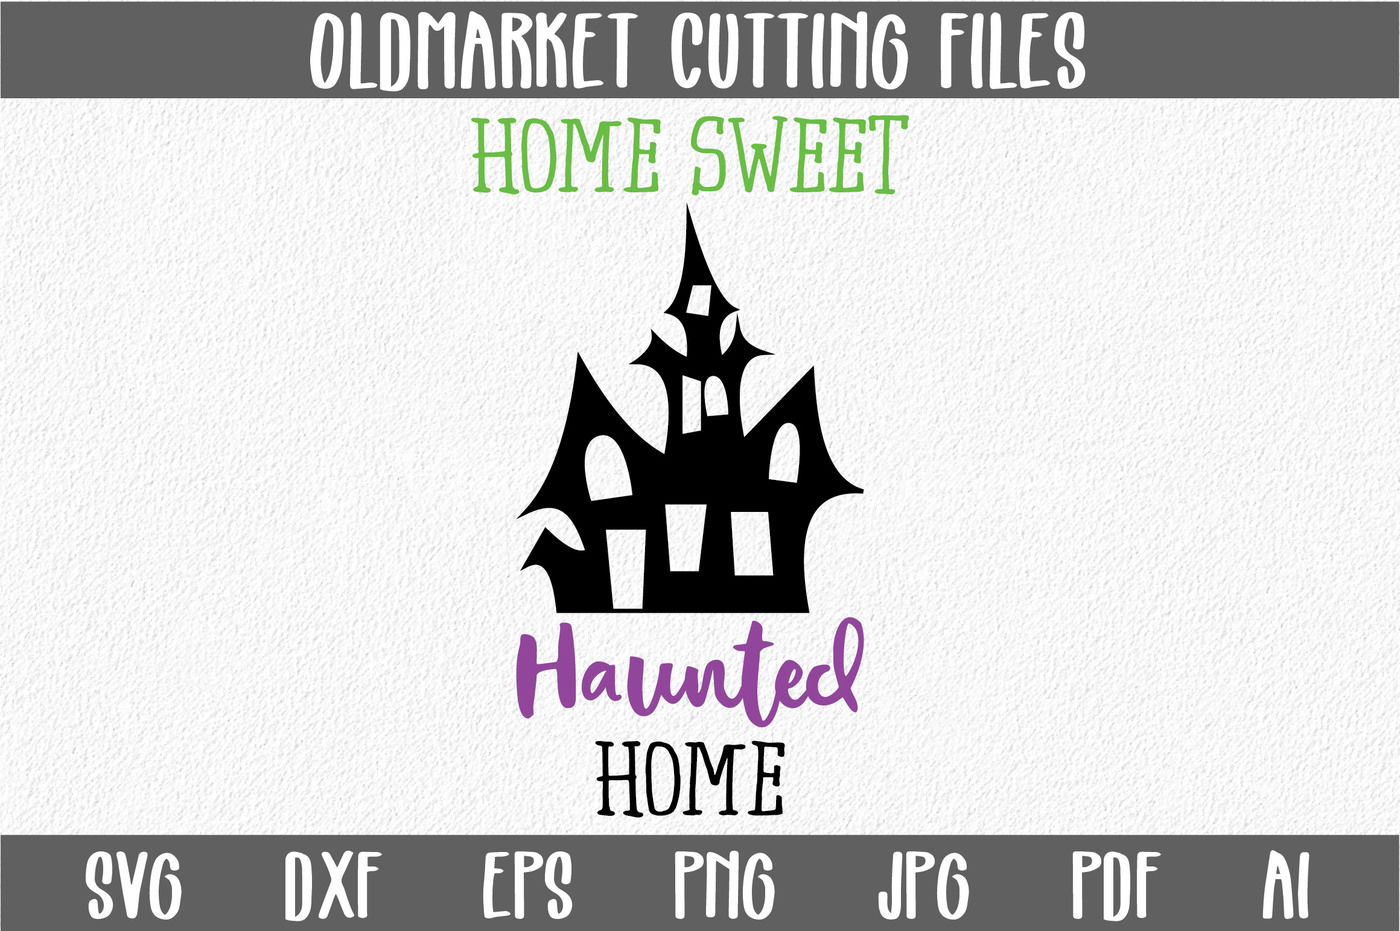 Home Sweet Haunted Home Svg Cut File Halloween Svg Eps Dxf Png By Shannon Keyser Thehungryjpeg Com